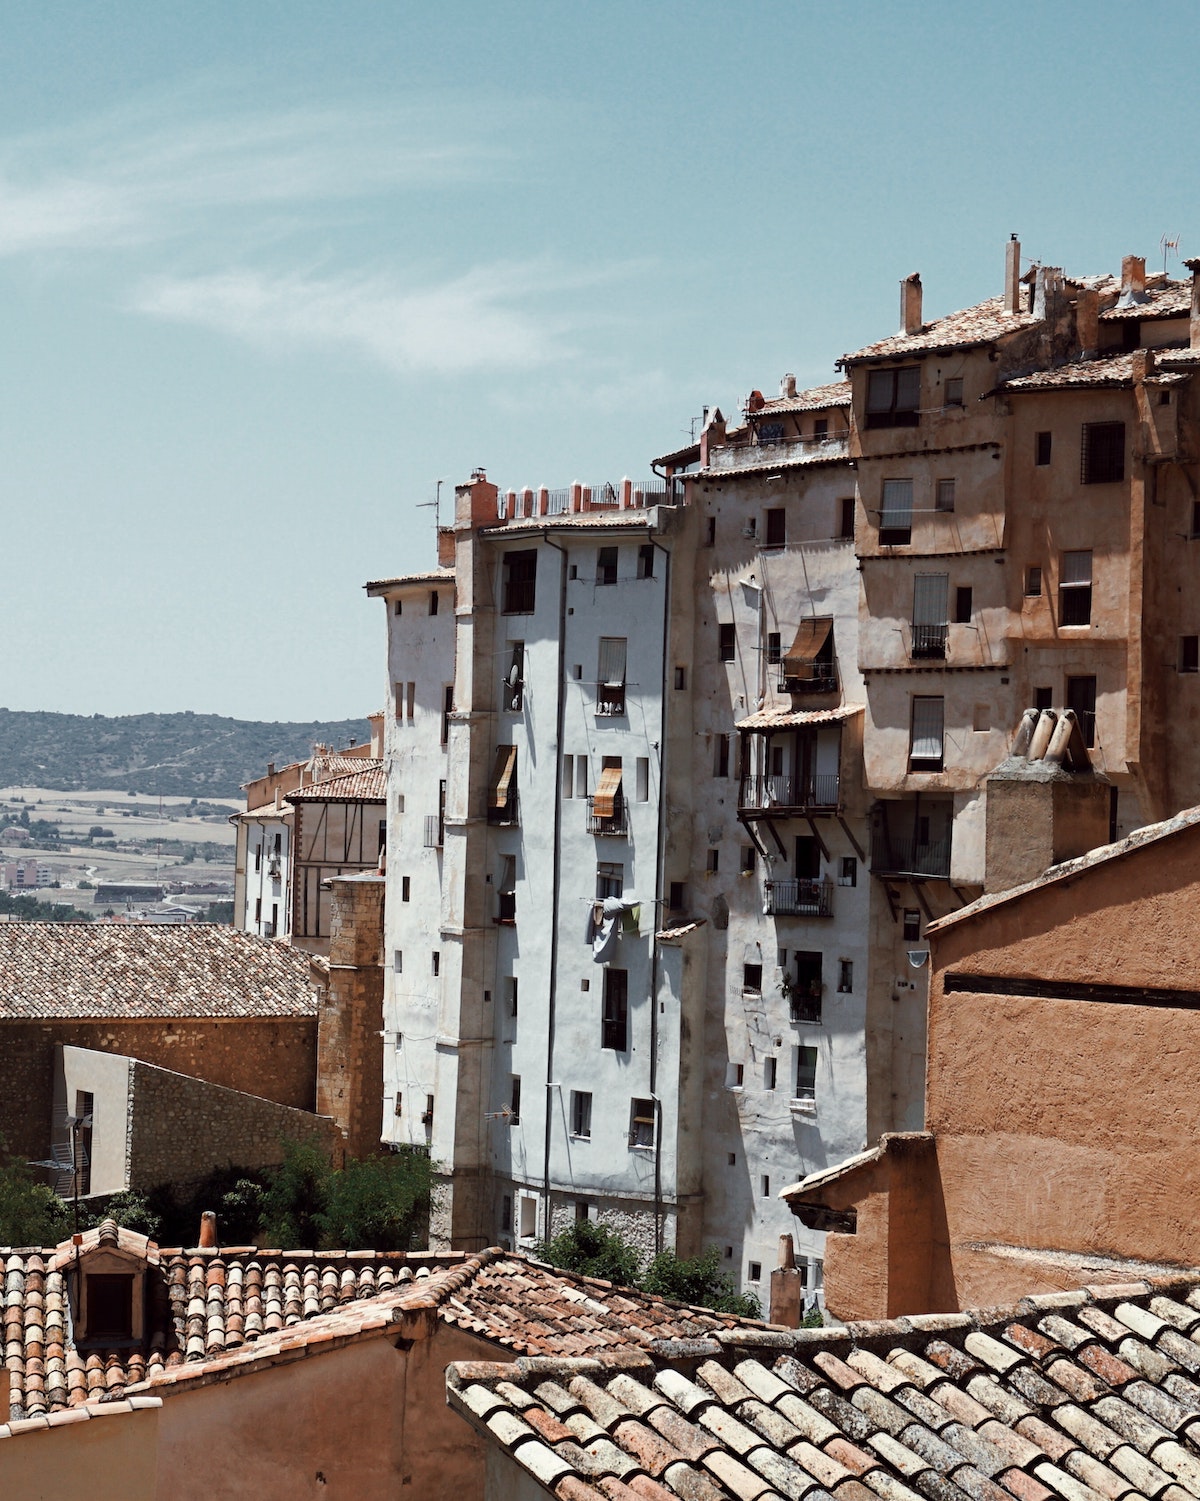 White and brown concrete buildings in a small Spanish town.